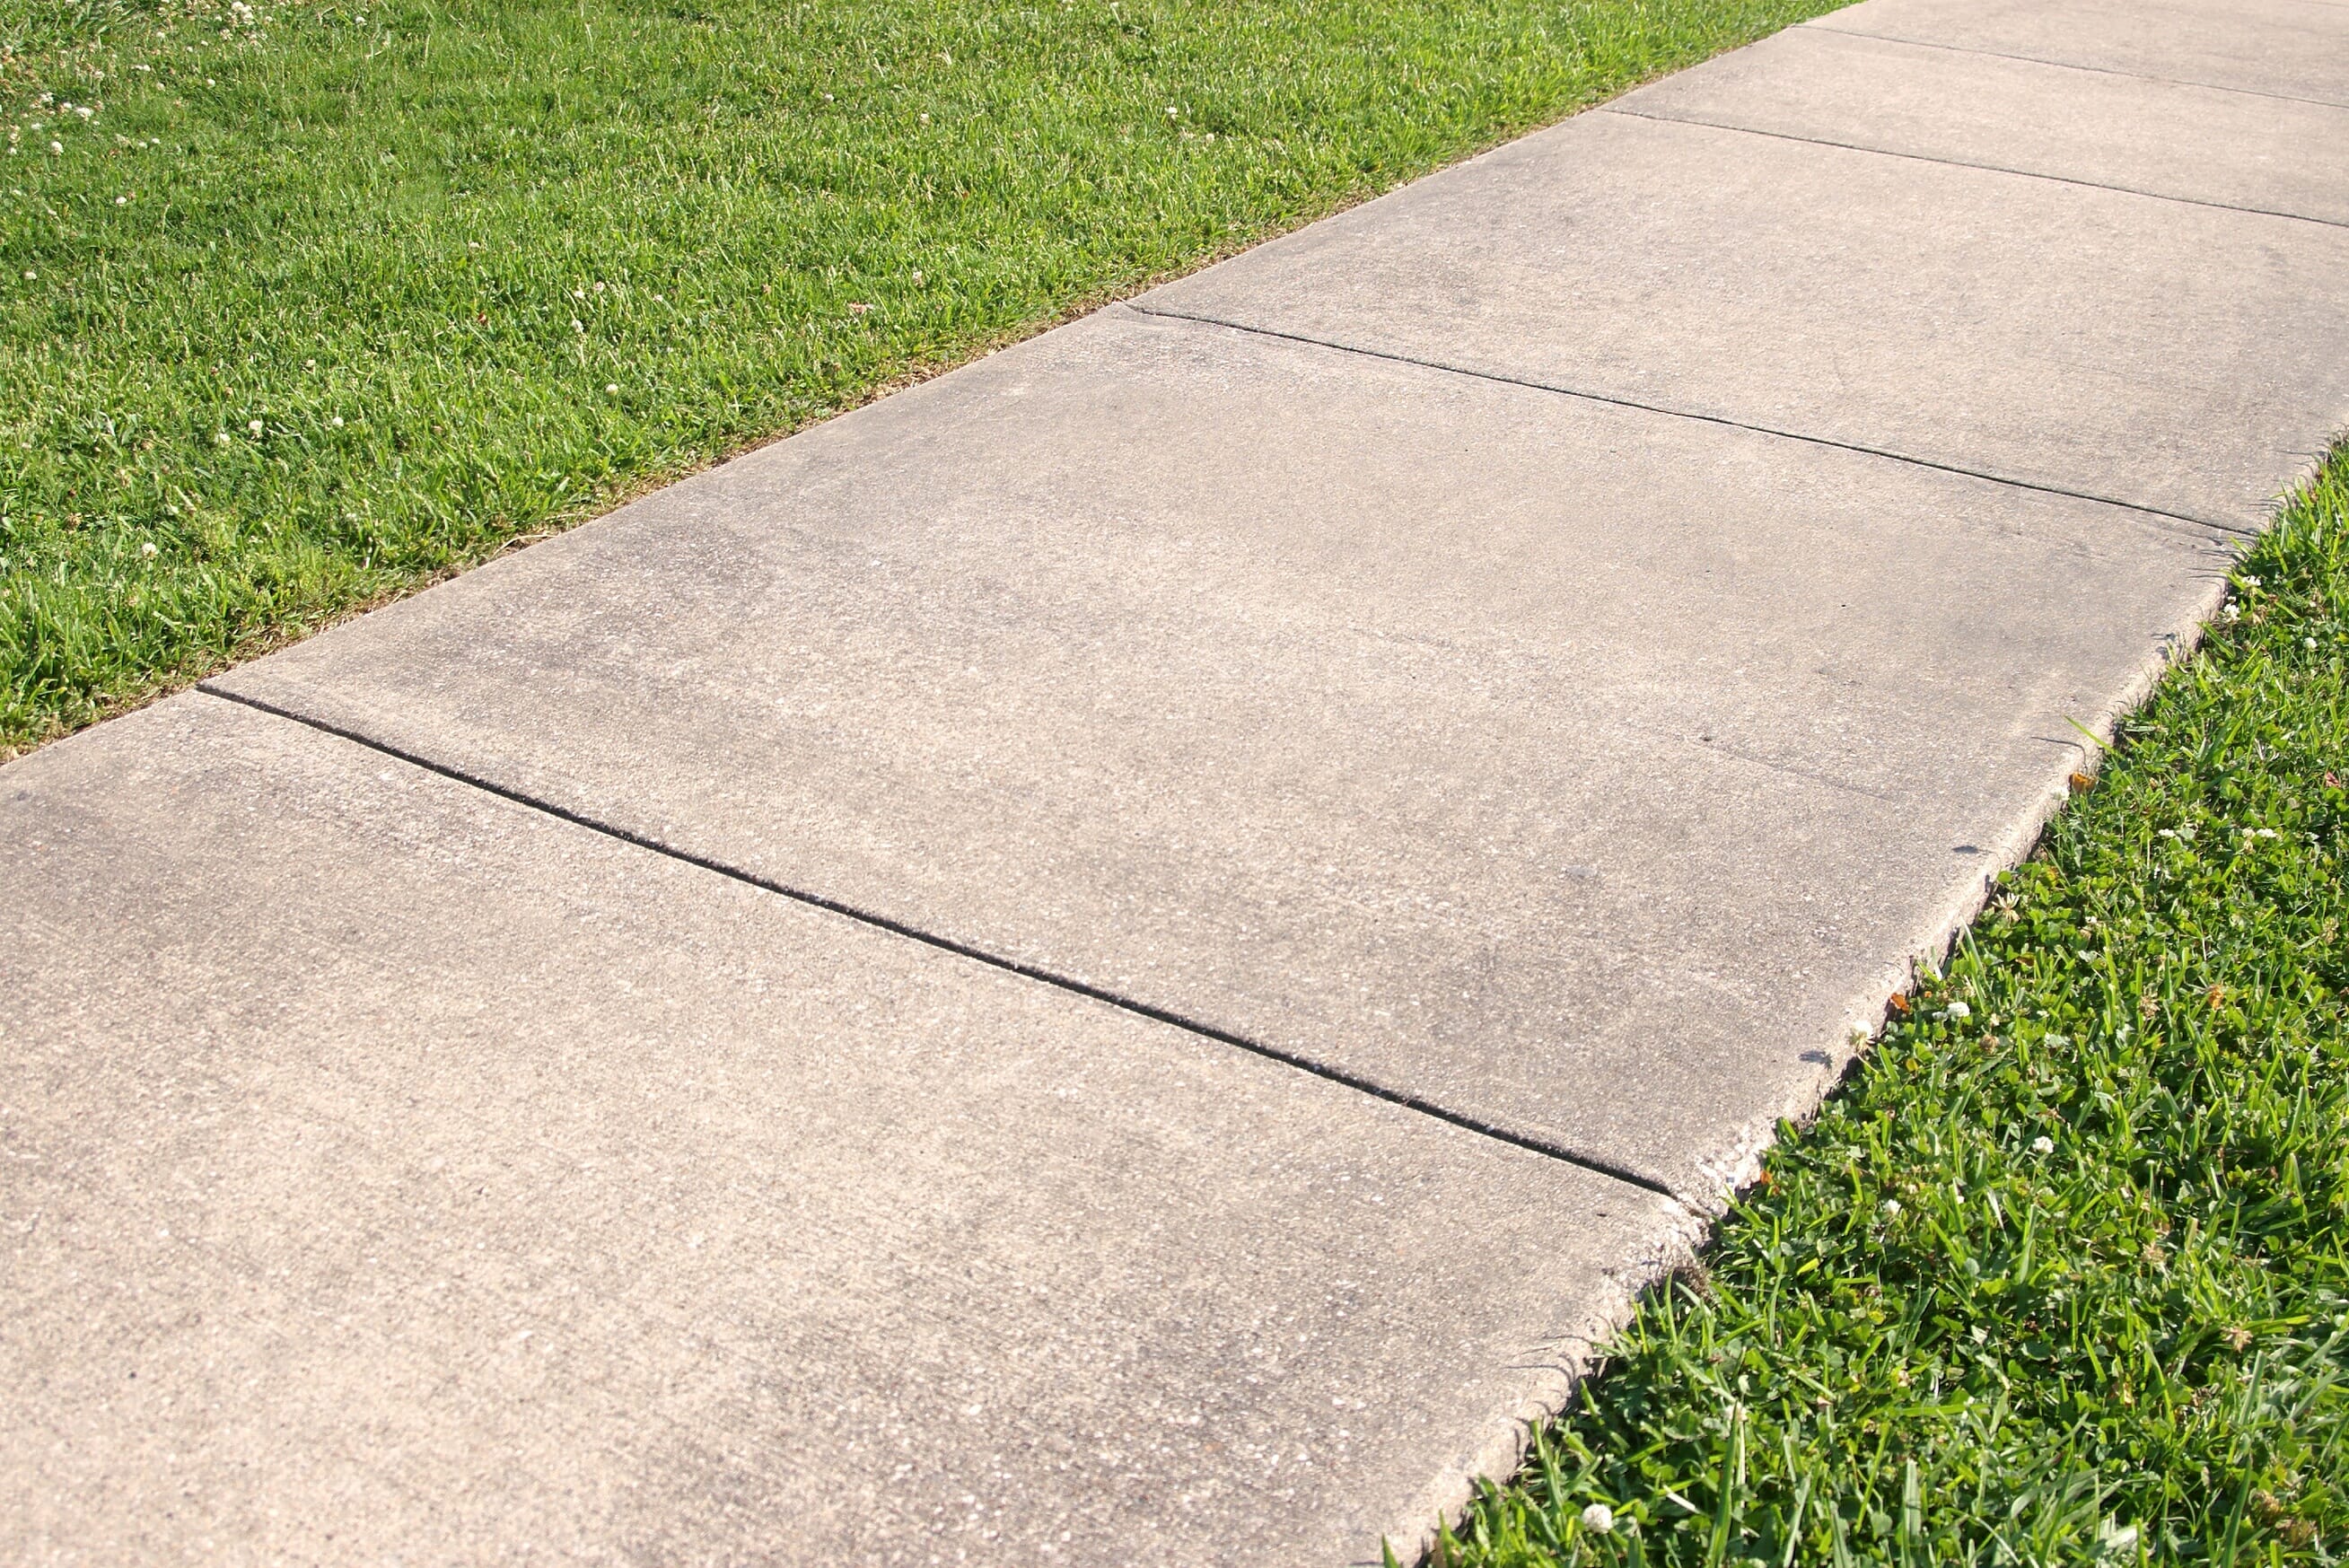 Concrete sidewalk with control joints